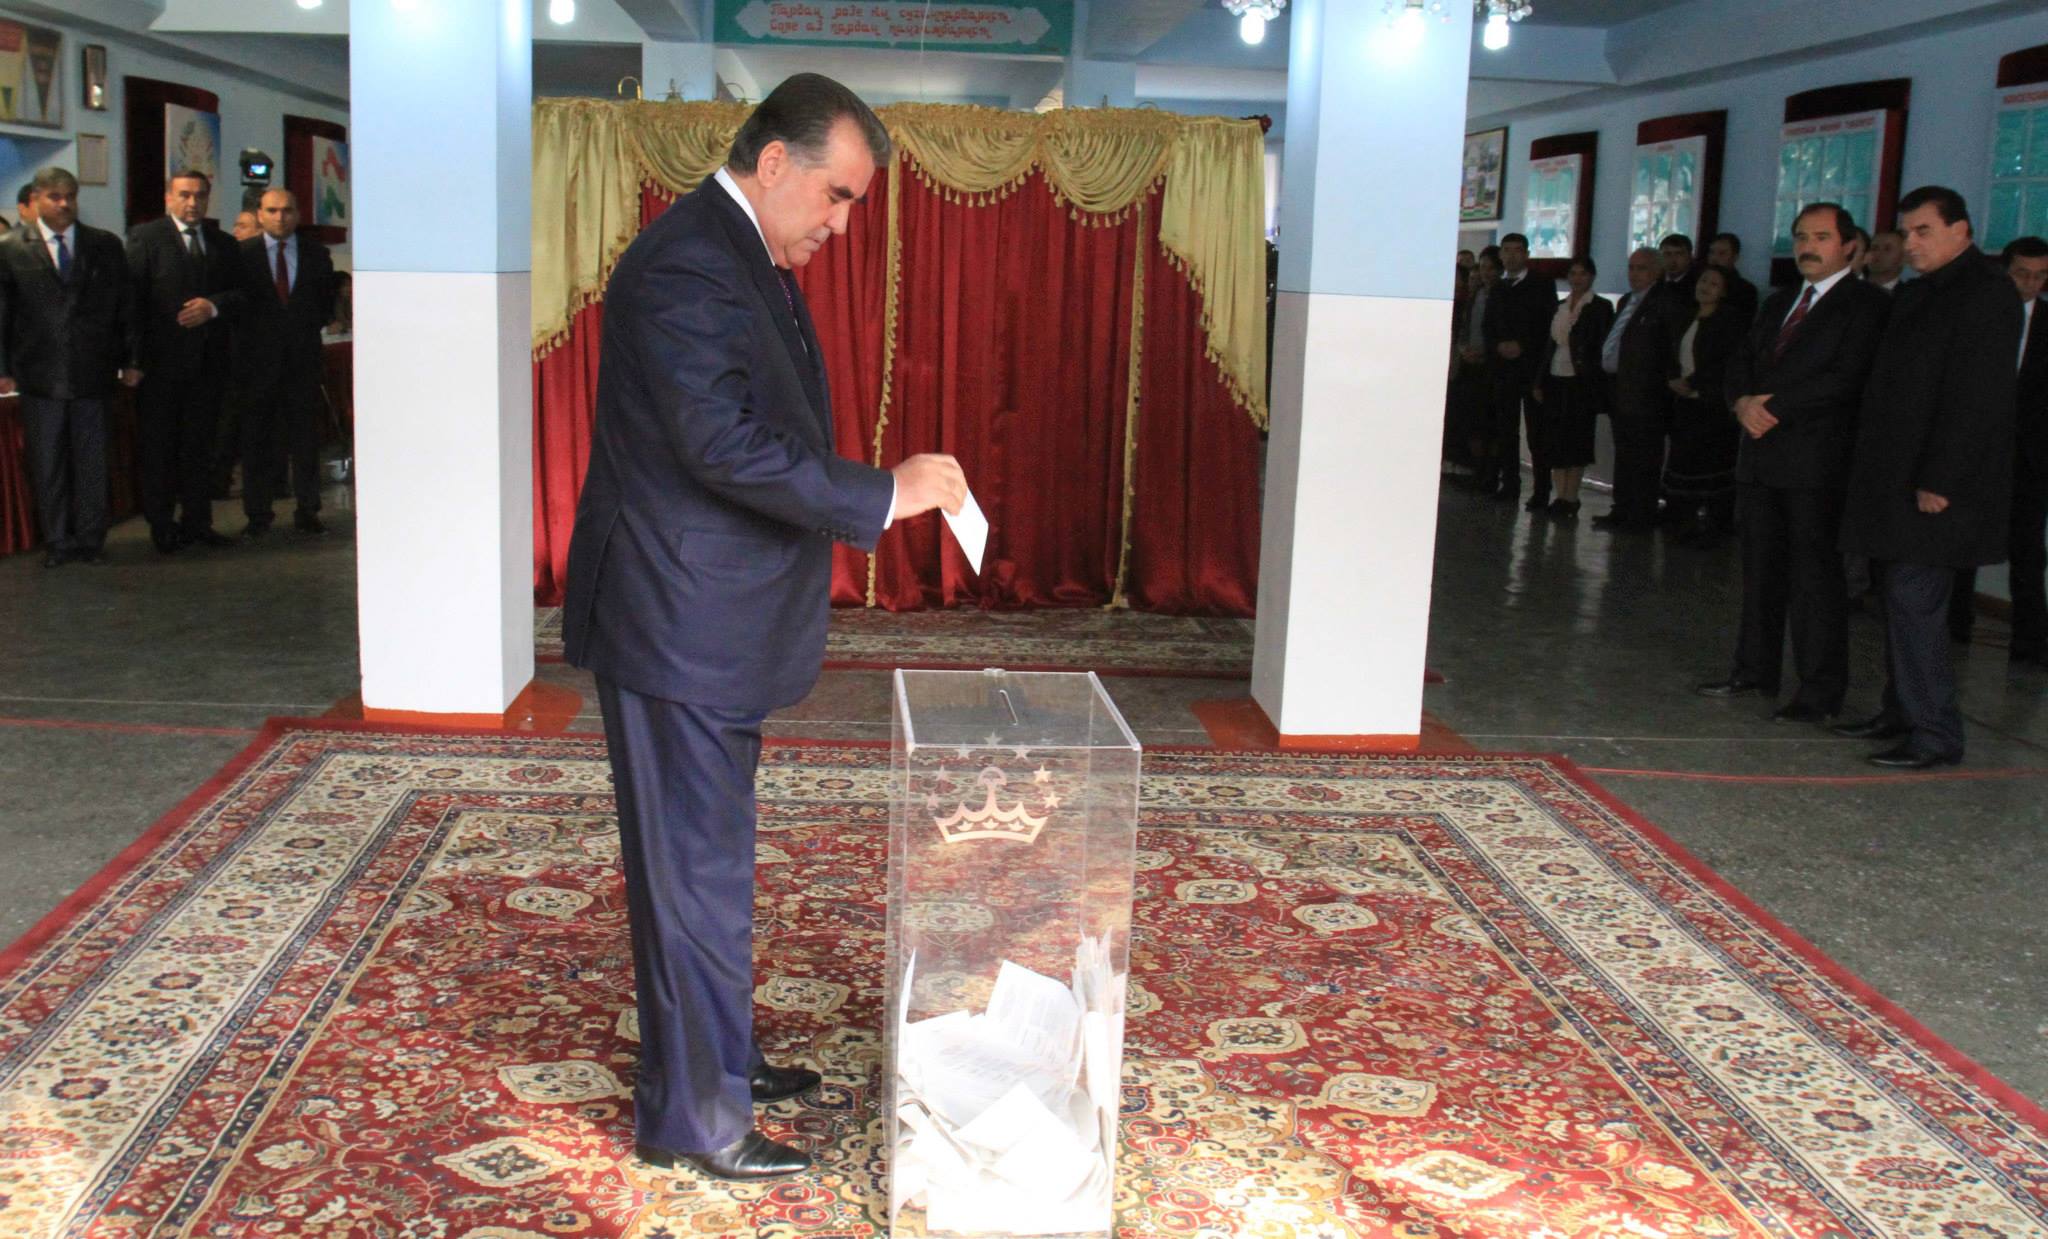 President Emomali Rahmon casting his vote today. Photo by president's press service, part of public domain.